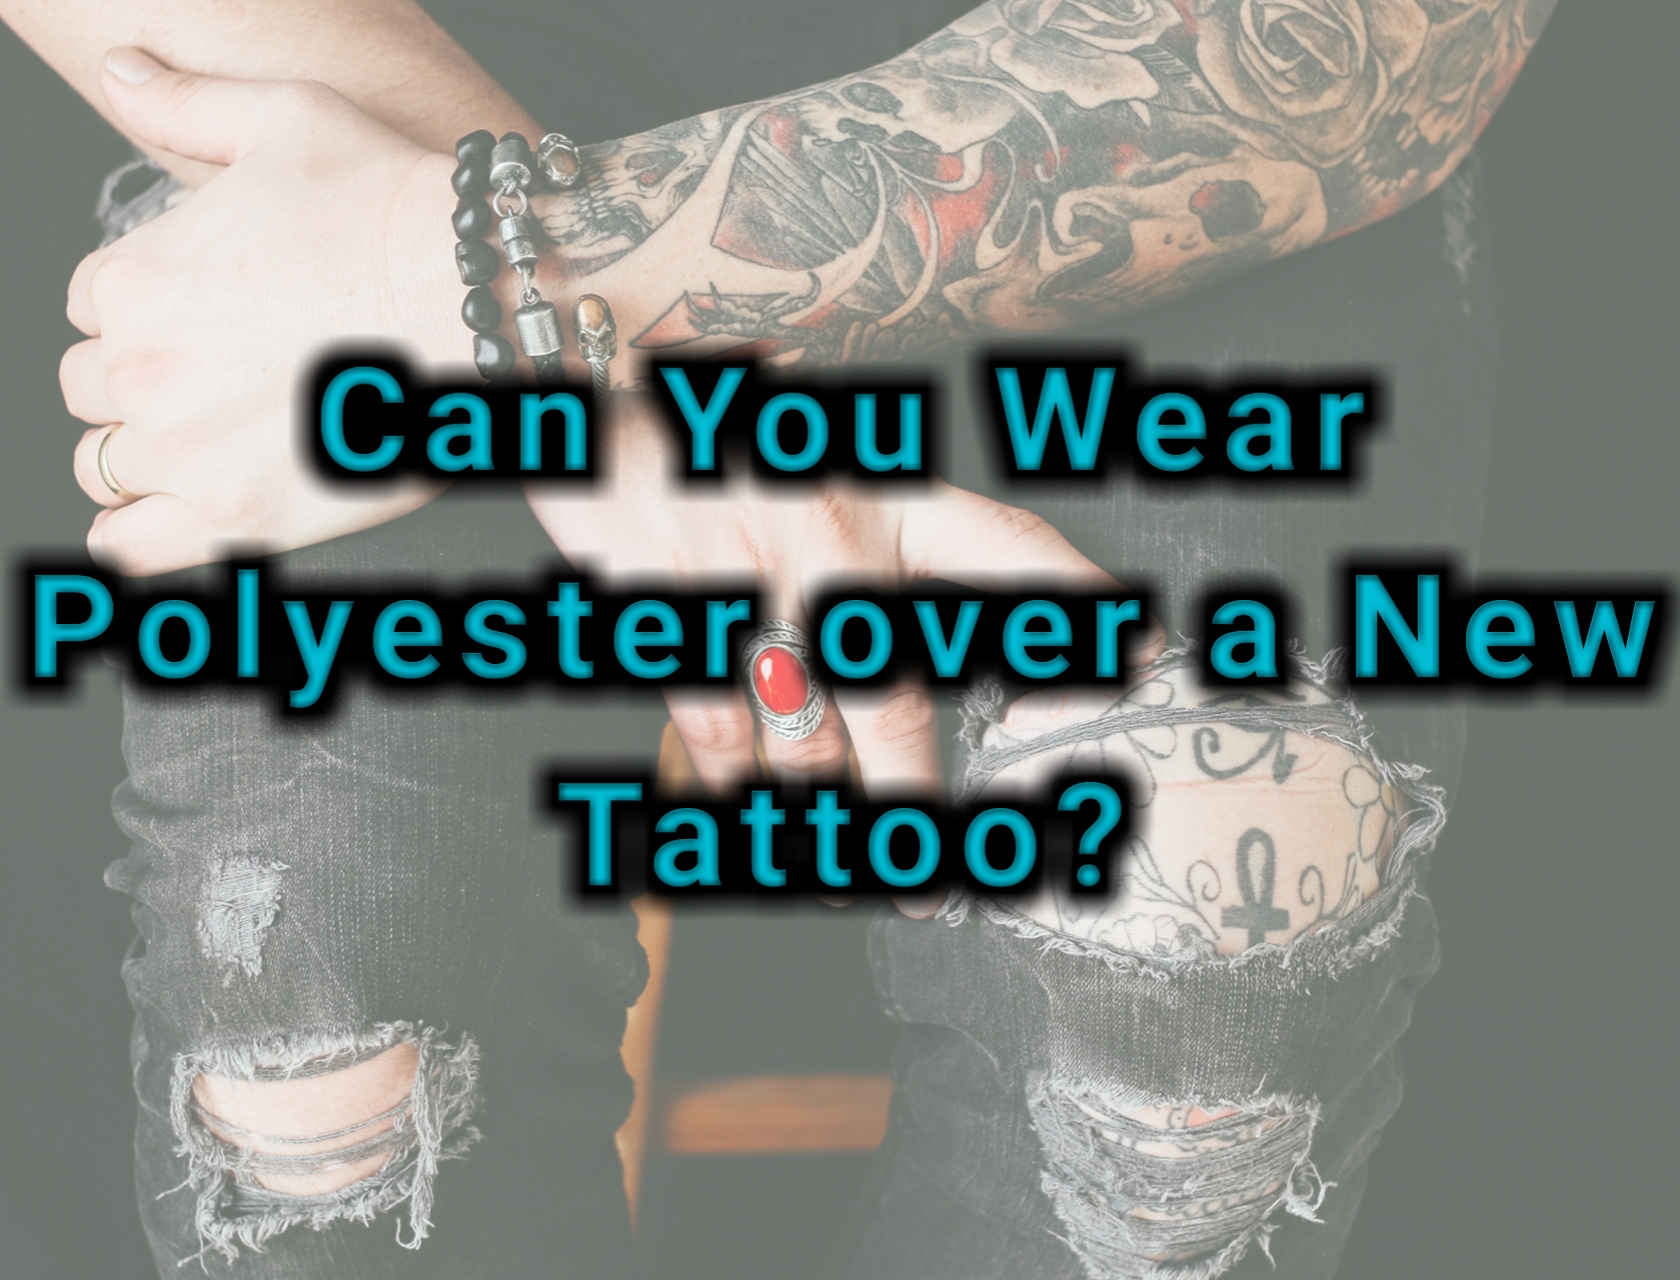 Can You Wear Polyester over a New Tattoo